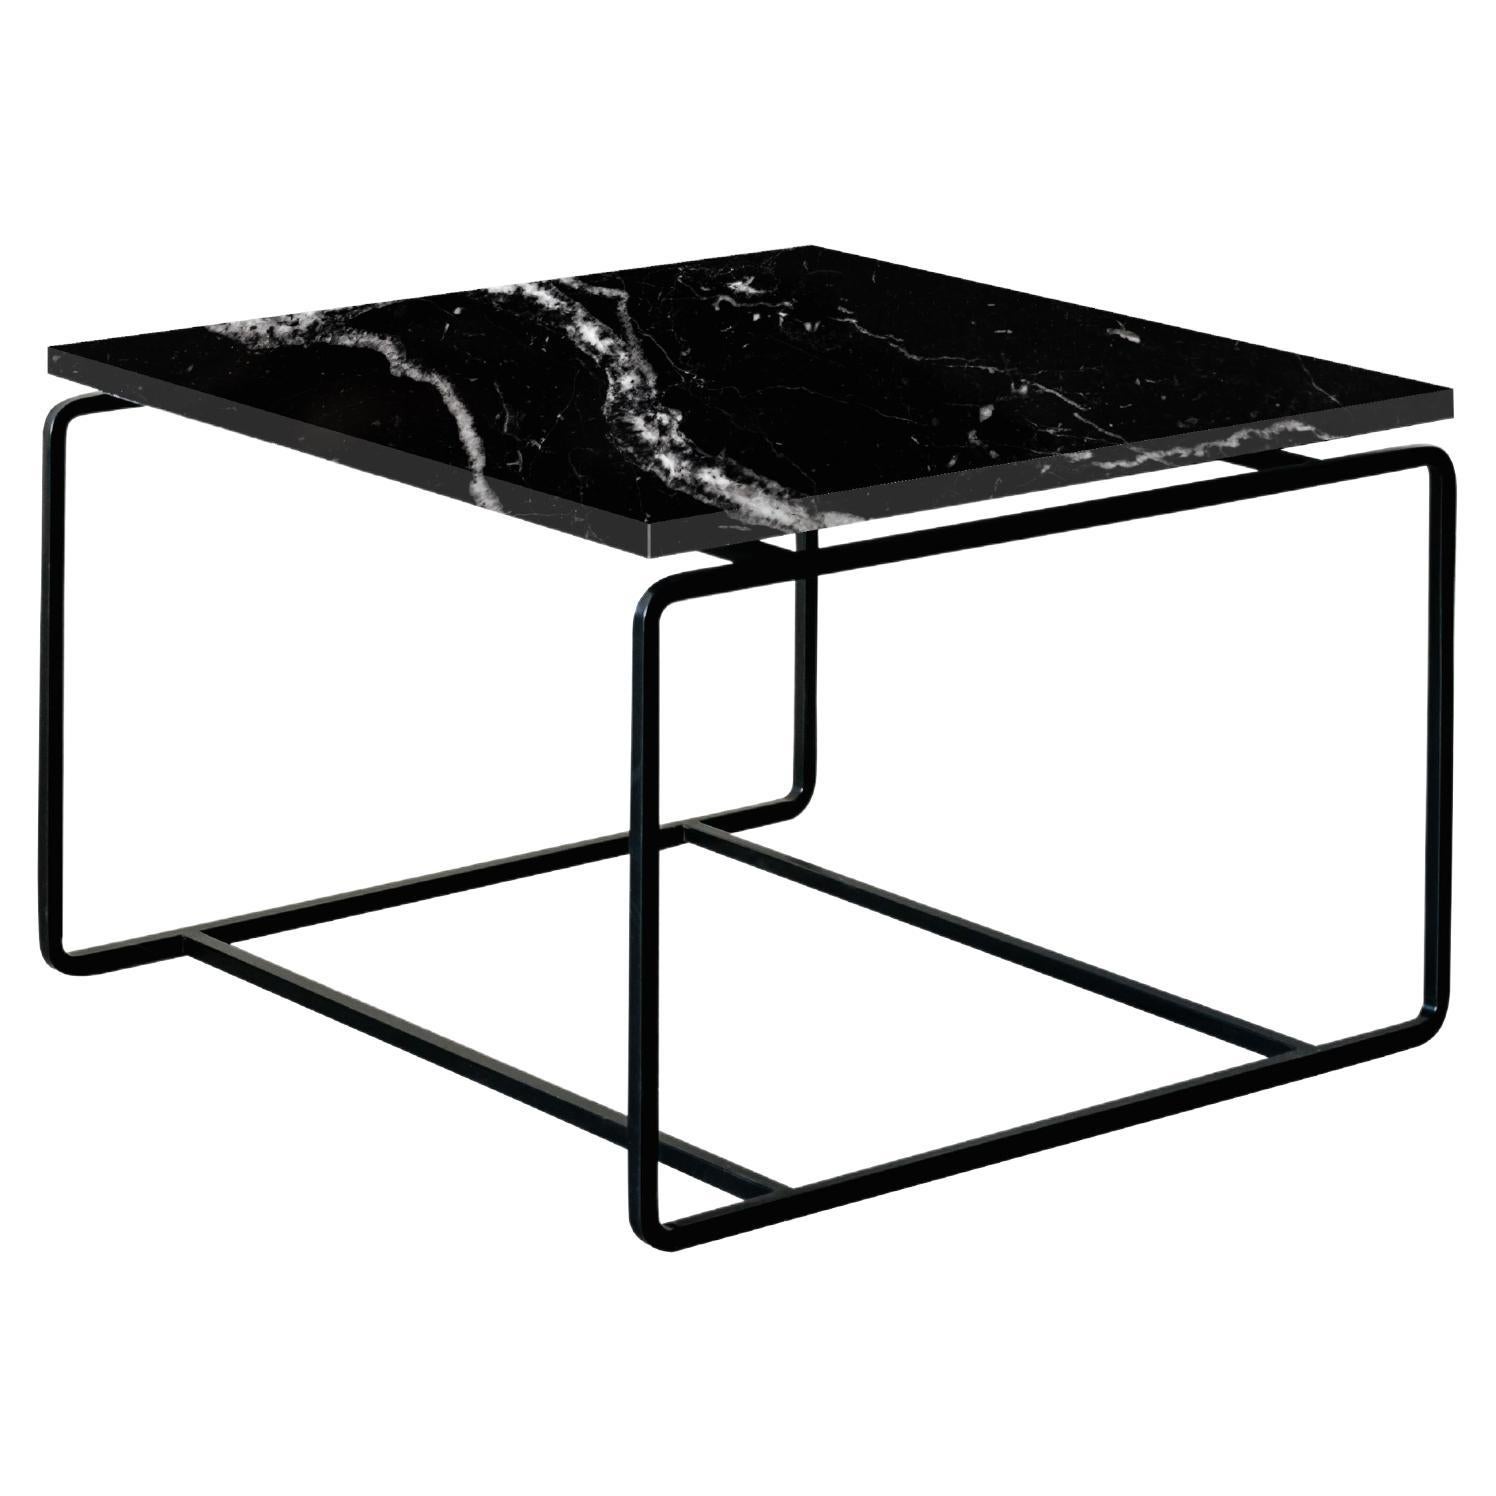 Nero Marquina Form a Coffee Table by Un’common